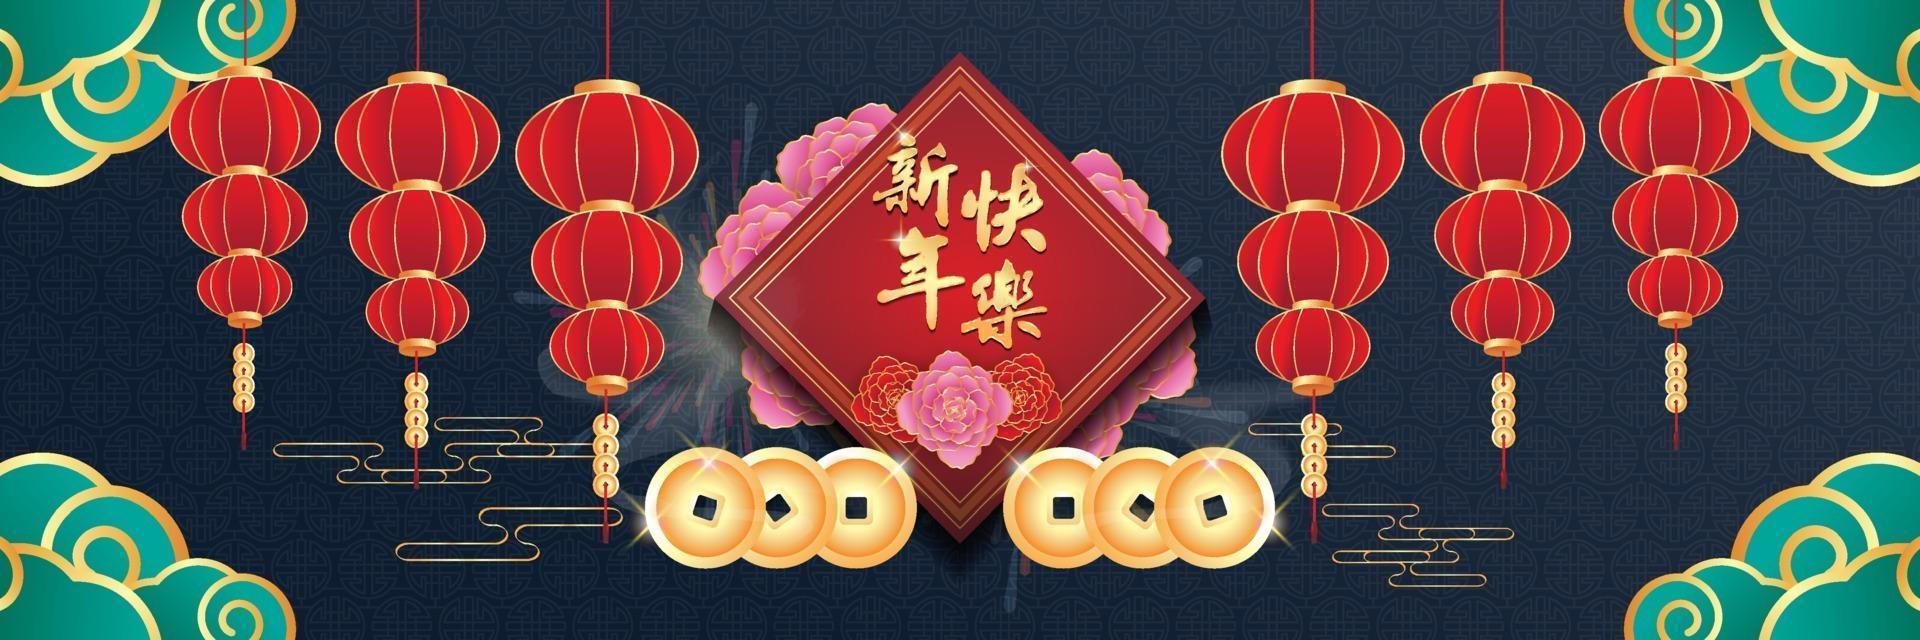 Happy Chinese New Year of the ox. Chinese typography means Happy New Year, wealth for greeting card, flyers, invitation, posters, brochure, banners, calendar. vector